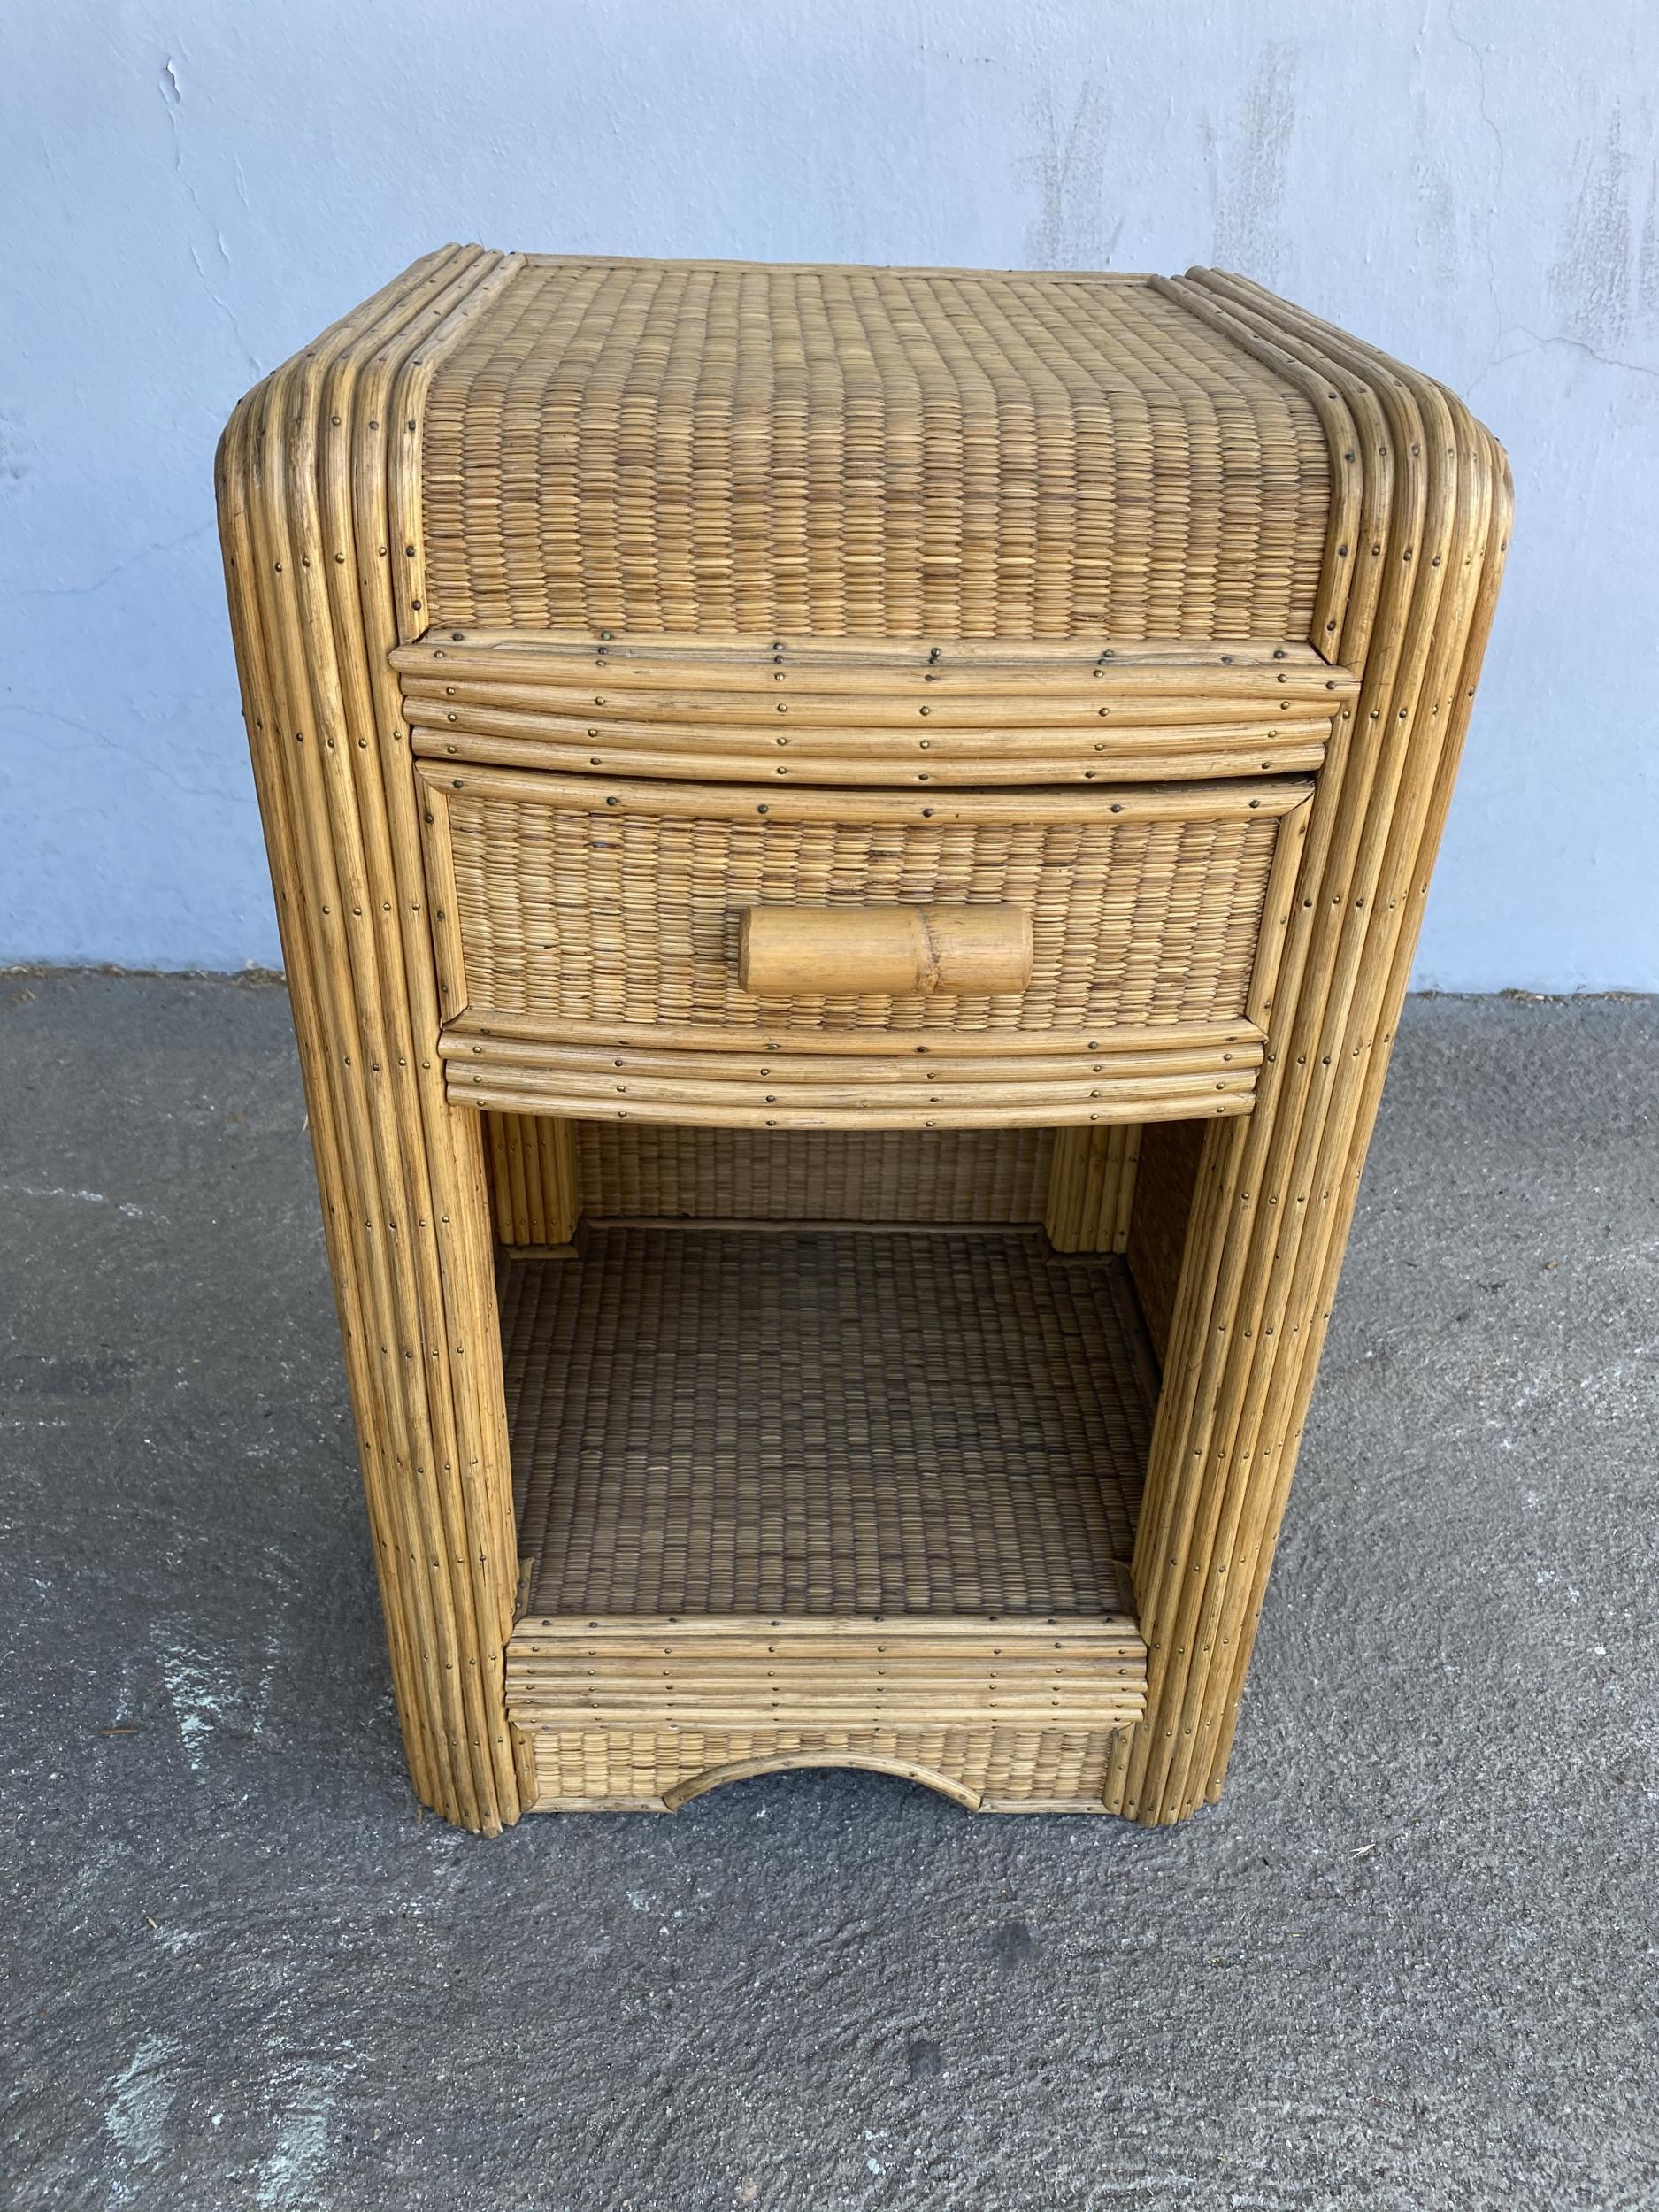 Streamline stick rattan side table with grass-mat coverings, a Rattan pull handle, and edges are finished with brass nails.

Designed in the manner of Paul Frankl.

Restored to new for you.

All rattan, bamboo and wicker furniture has been